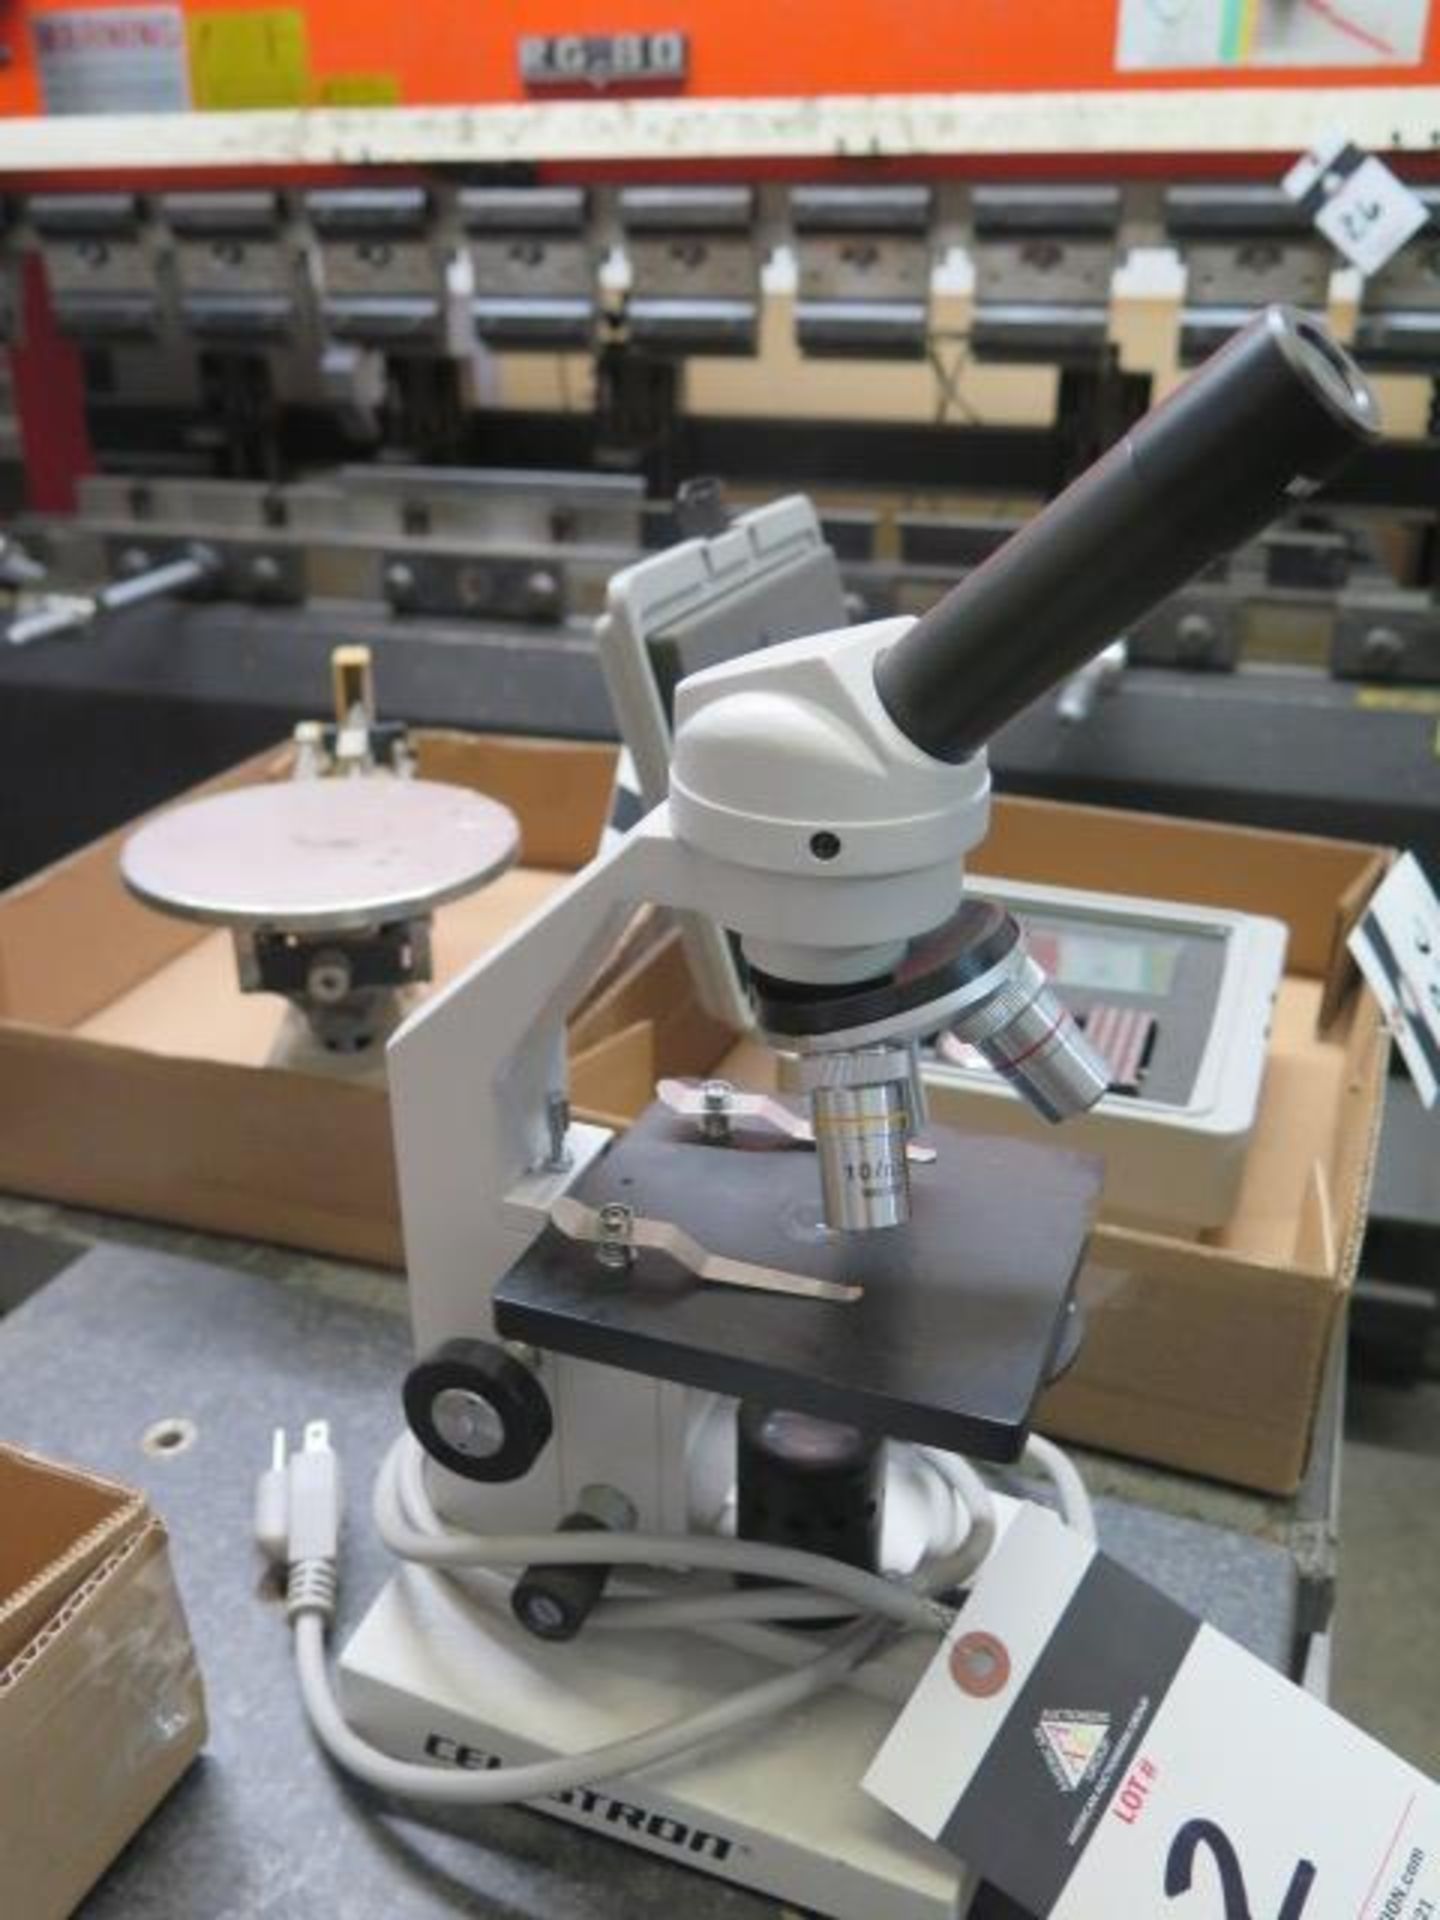 Celestron Lab Microscope (SOLD AS-IS - NO WARRANTY) - Image 2 of 6